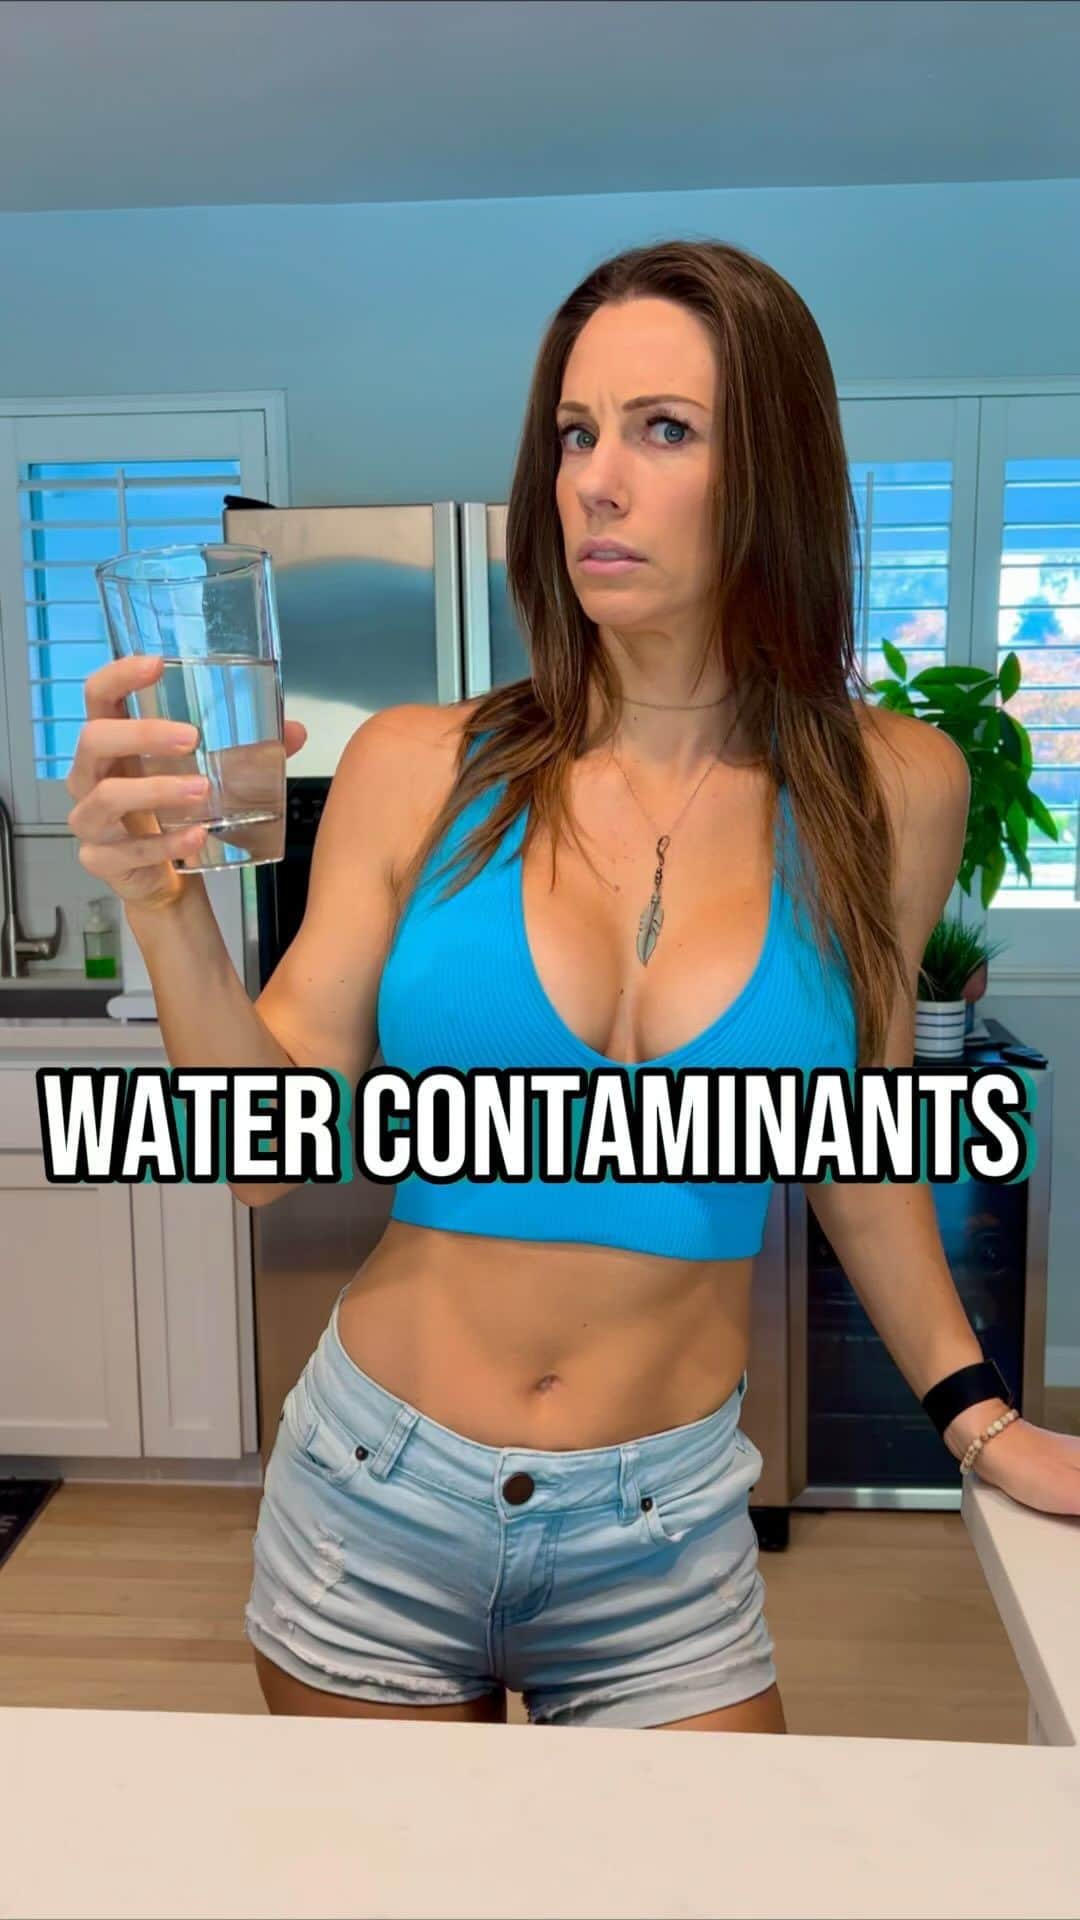 Janna Breslinのインスタグラム：「🚰💧Alarming findings! An EWG investigation revealed that 85% of the nation’s drinking water contains 316 contaminants, with over 60% lacking safety standards.  The outdated Safe Drinking Water Act hasn’t added a single regulated chemical since 2000, and the criteria for determining the potential harm of a chemical at specific levels have remained unchanged since 1974. 😳 WHAT?!  We are constantly exposed to compounds that we know are detrimental to us…🧪 The most concerning and known contaminants in our tap water include lead, mercury, chlorine, pharmaceuticals, herbicides, pesticides etc. And those are just the ones we know of… yikes.  🤒 After my cancer diagnosis in 2015, I researched everything & changed everything about my lifestyle. But when I did the deep dives on what’s really going on out there, I found some pretty ugly stuff.  🚿 We can filter our drinking water as much as we want, and that’s better than nothing of course, but I get concerned about what we’re showering in too… because our skin absorbs 60-70% of what we we expose it too.  We are surrounded and bombarded! This is a huge reason why I opt for healthy skin products, like my homemade Tallow Balm 🥩🧴and avoid perfumes & chemical laden beauty products.  Stay safe out there, friends!!  #EarnYourFreedom #WaterQuality #GTFOutside #TapWater」